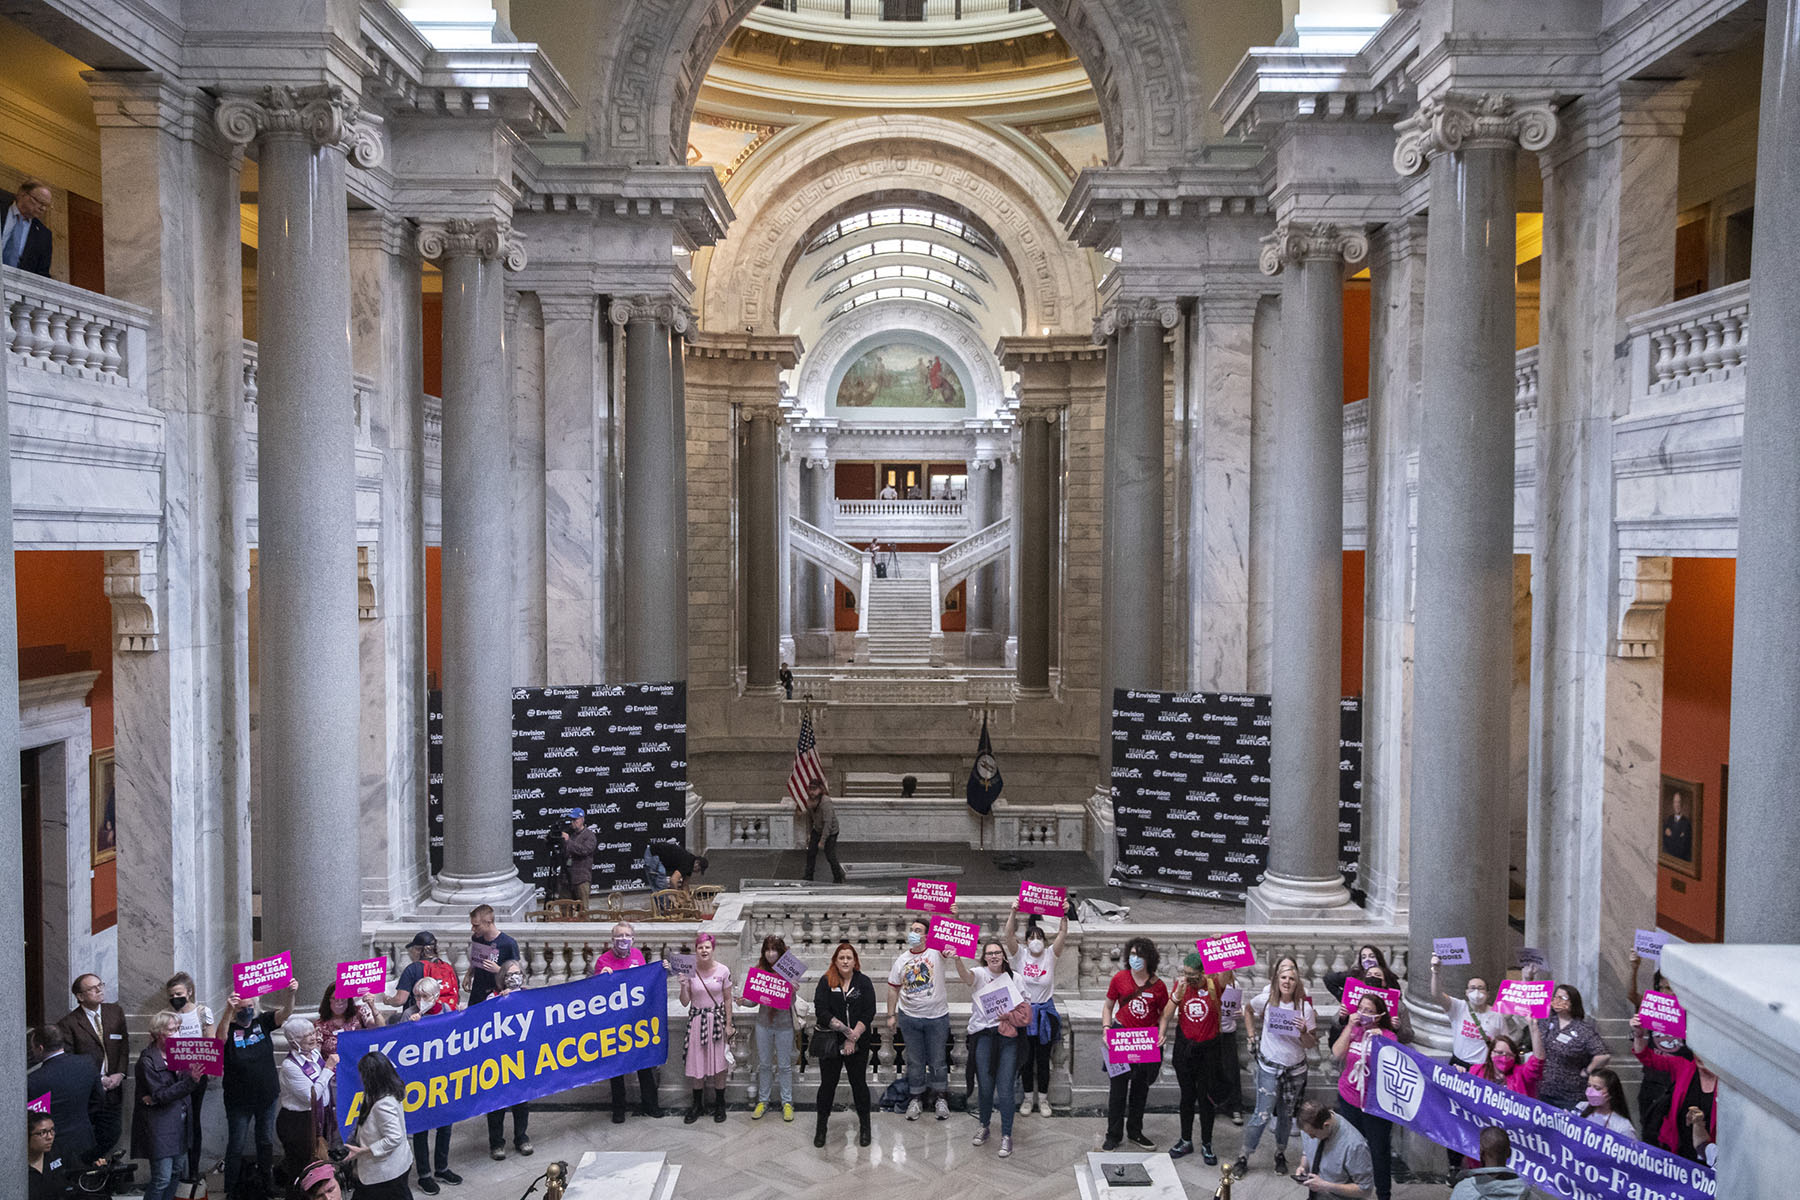 Abortion rights demonstrators holding signs gather at the Kentucky State Capitol.